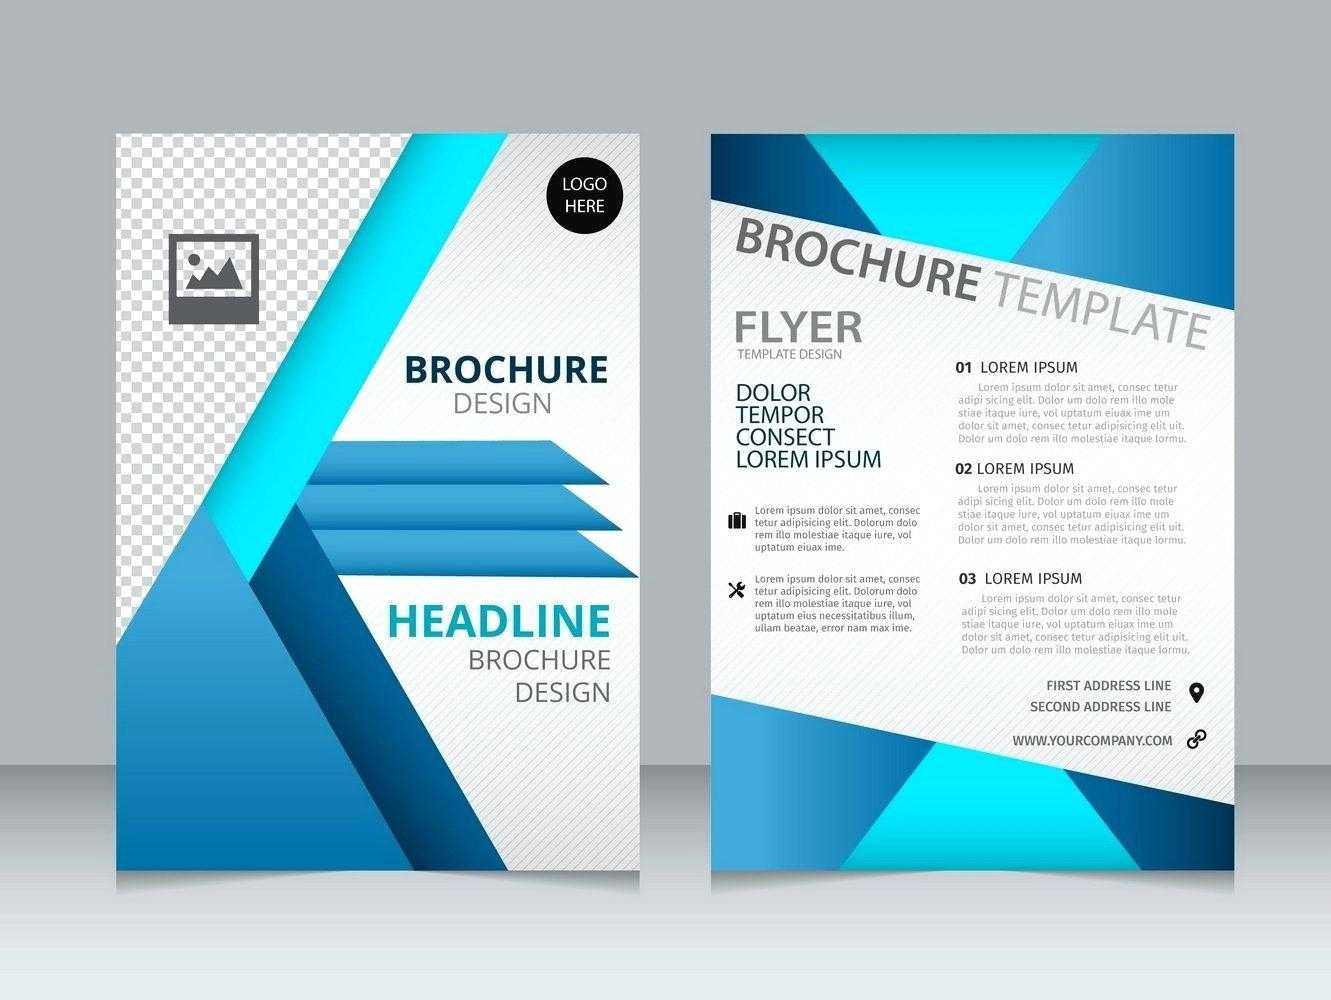 Free Brochure Template Downloads For Word Templates Intended For Free Brochure Template Downloads